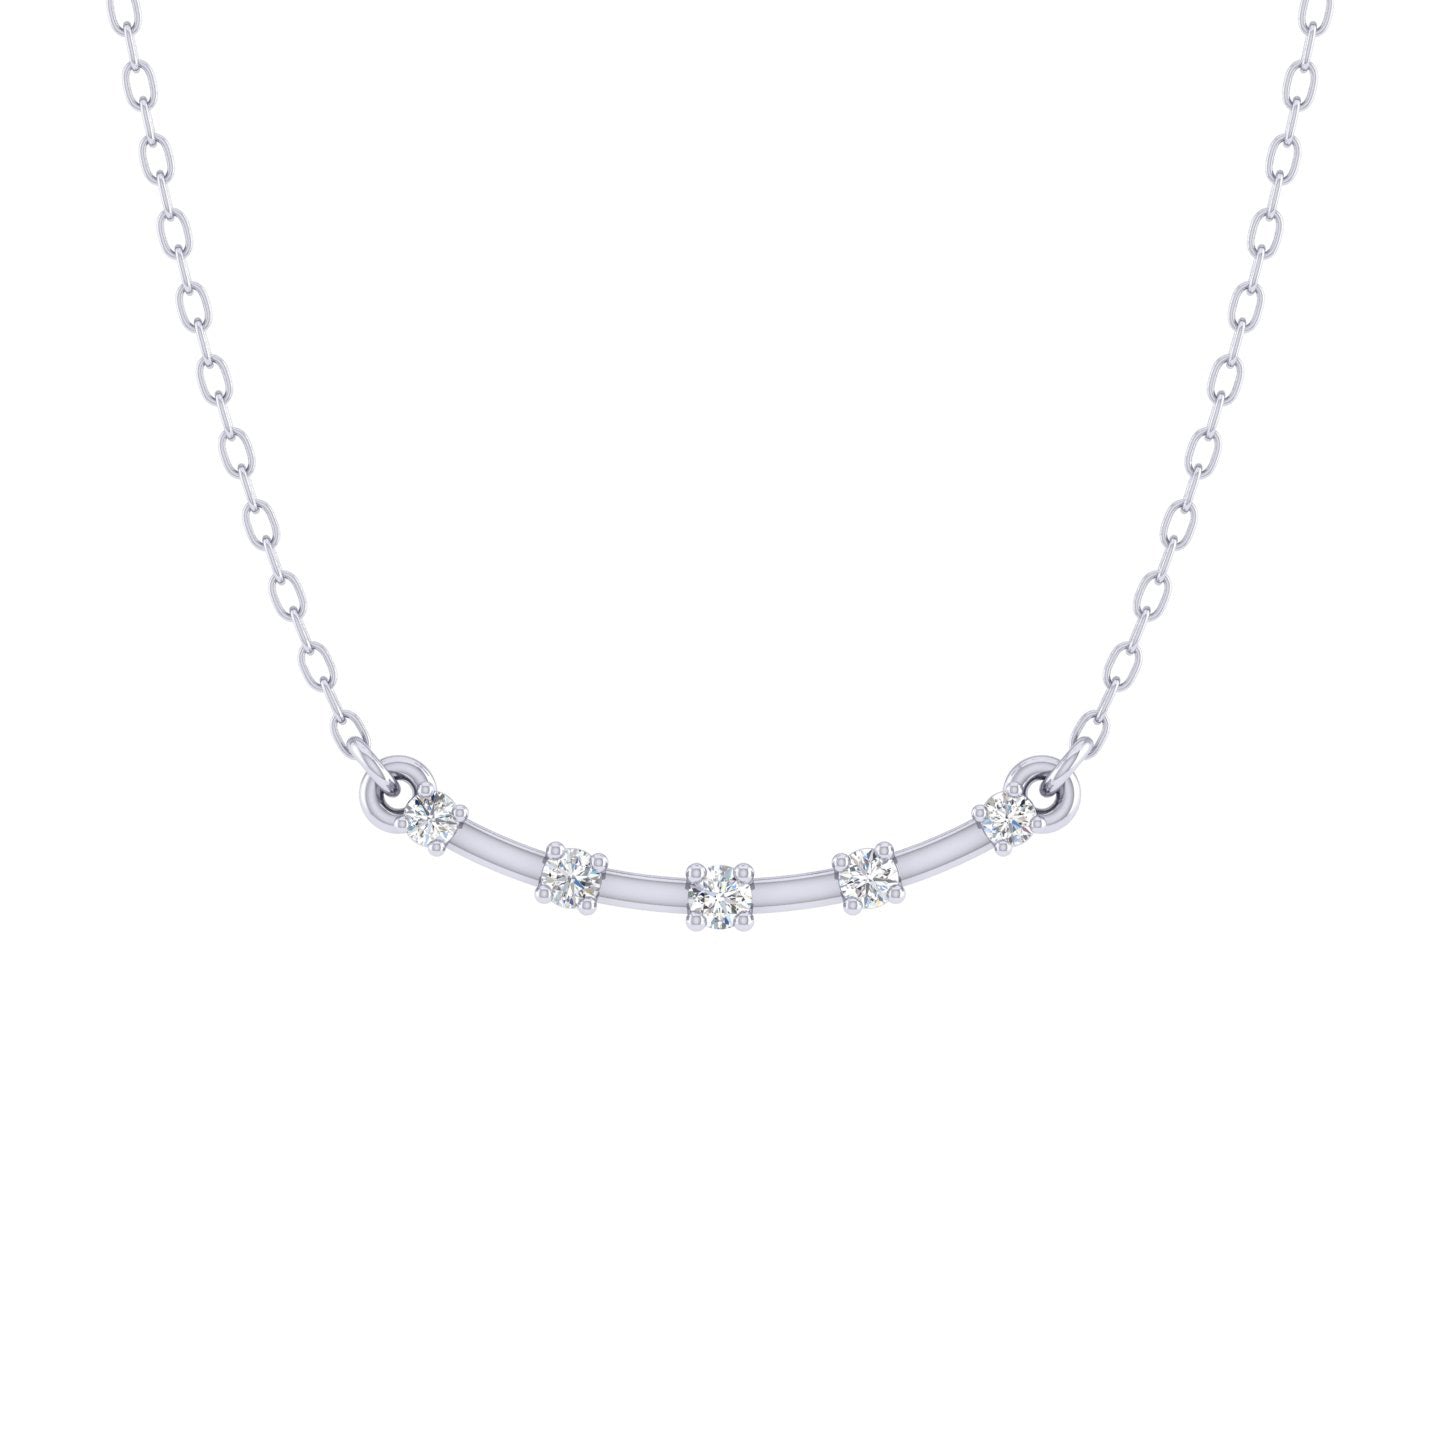 Curved Sideways Bar 1/20 Cttw Natural Diamond Pendant Necklace set in 925 Sterling Silver